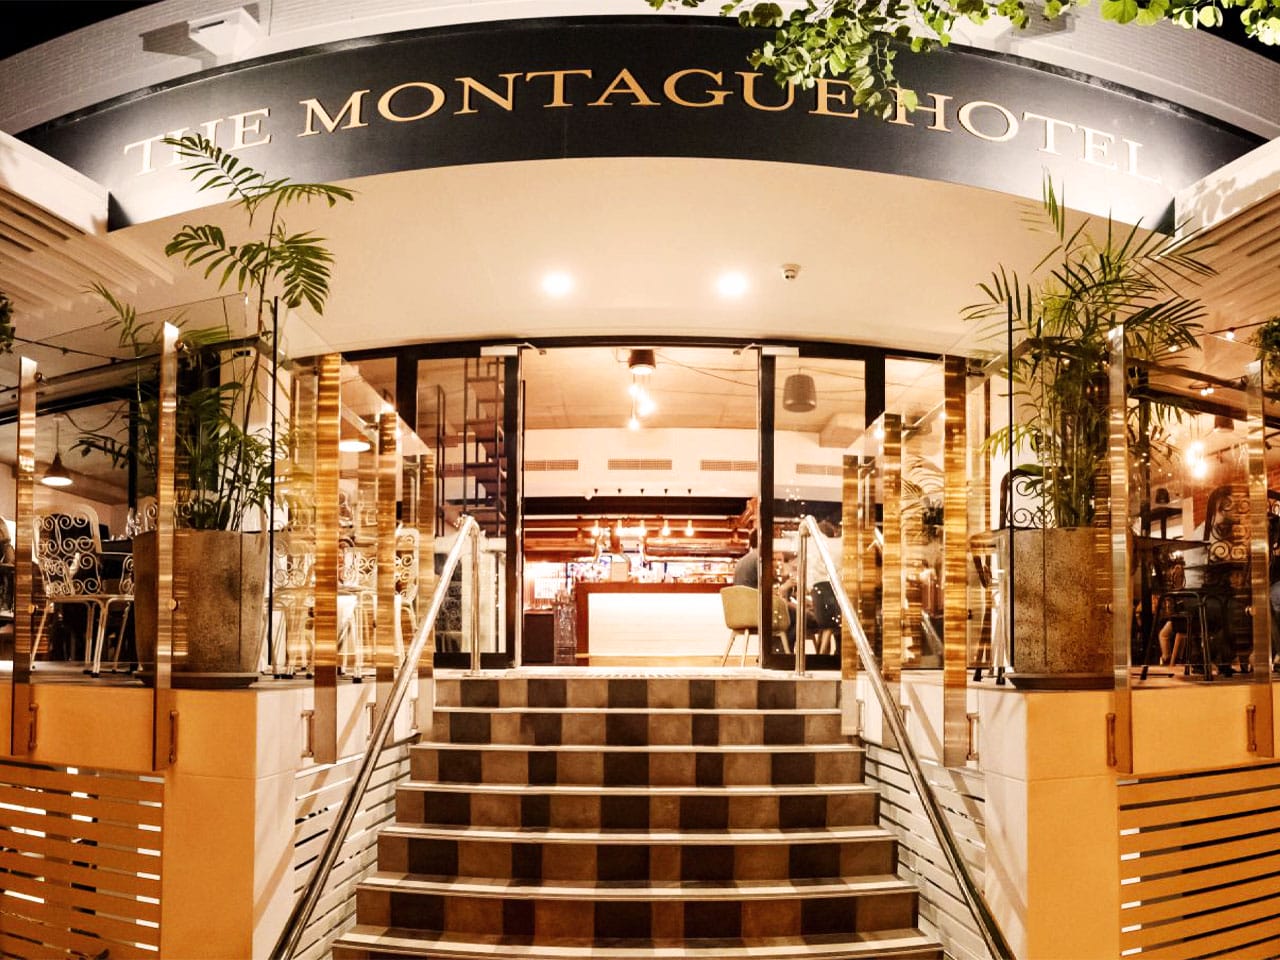 Montague Hotel entrance with sign above steps